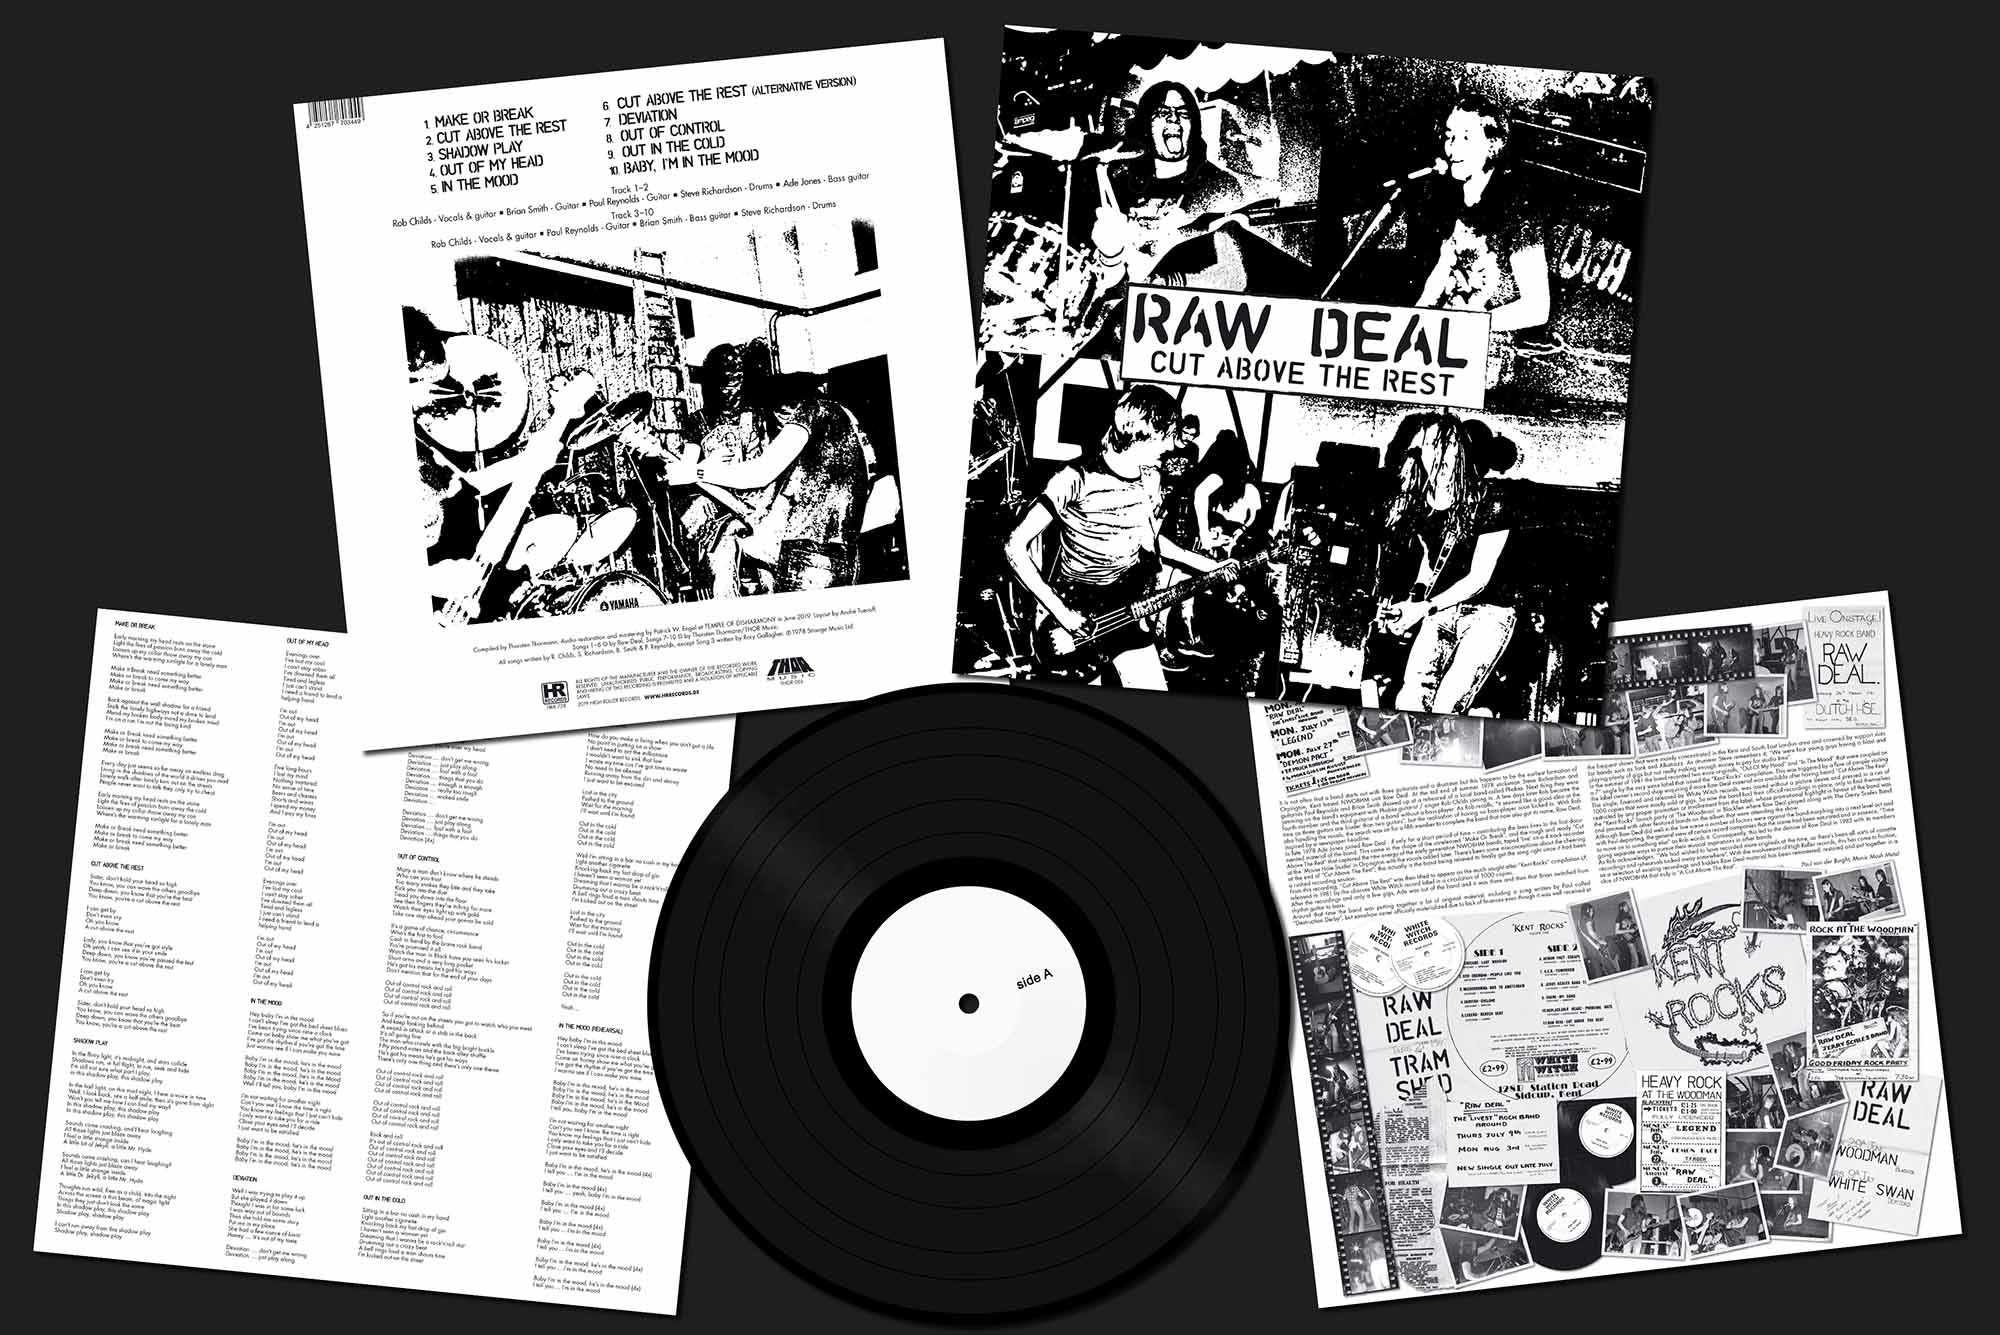 RAW DEAL - Cut Above the Rest  LP